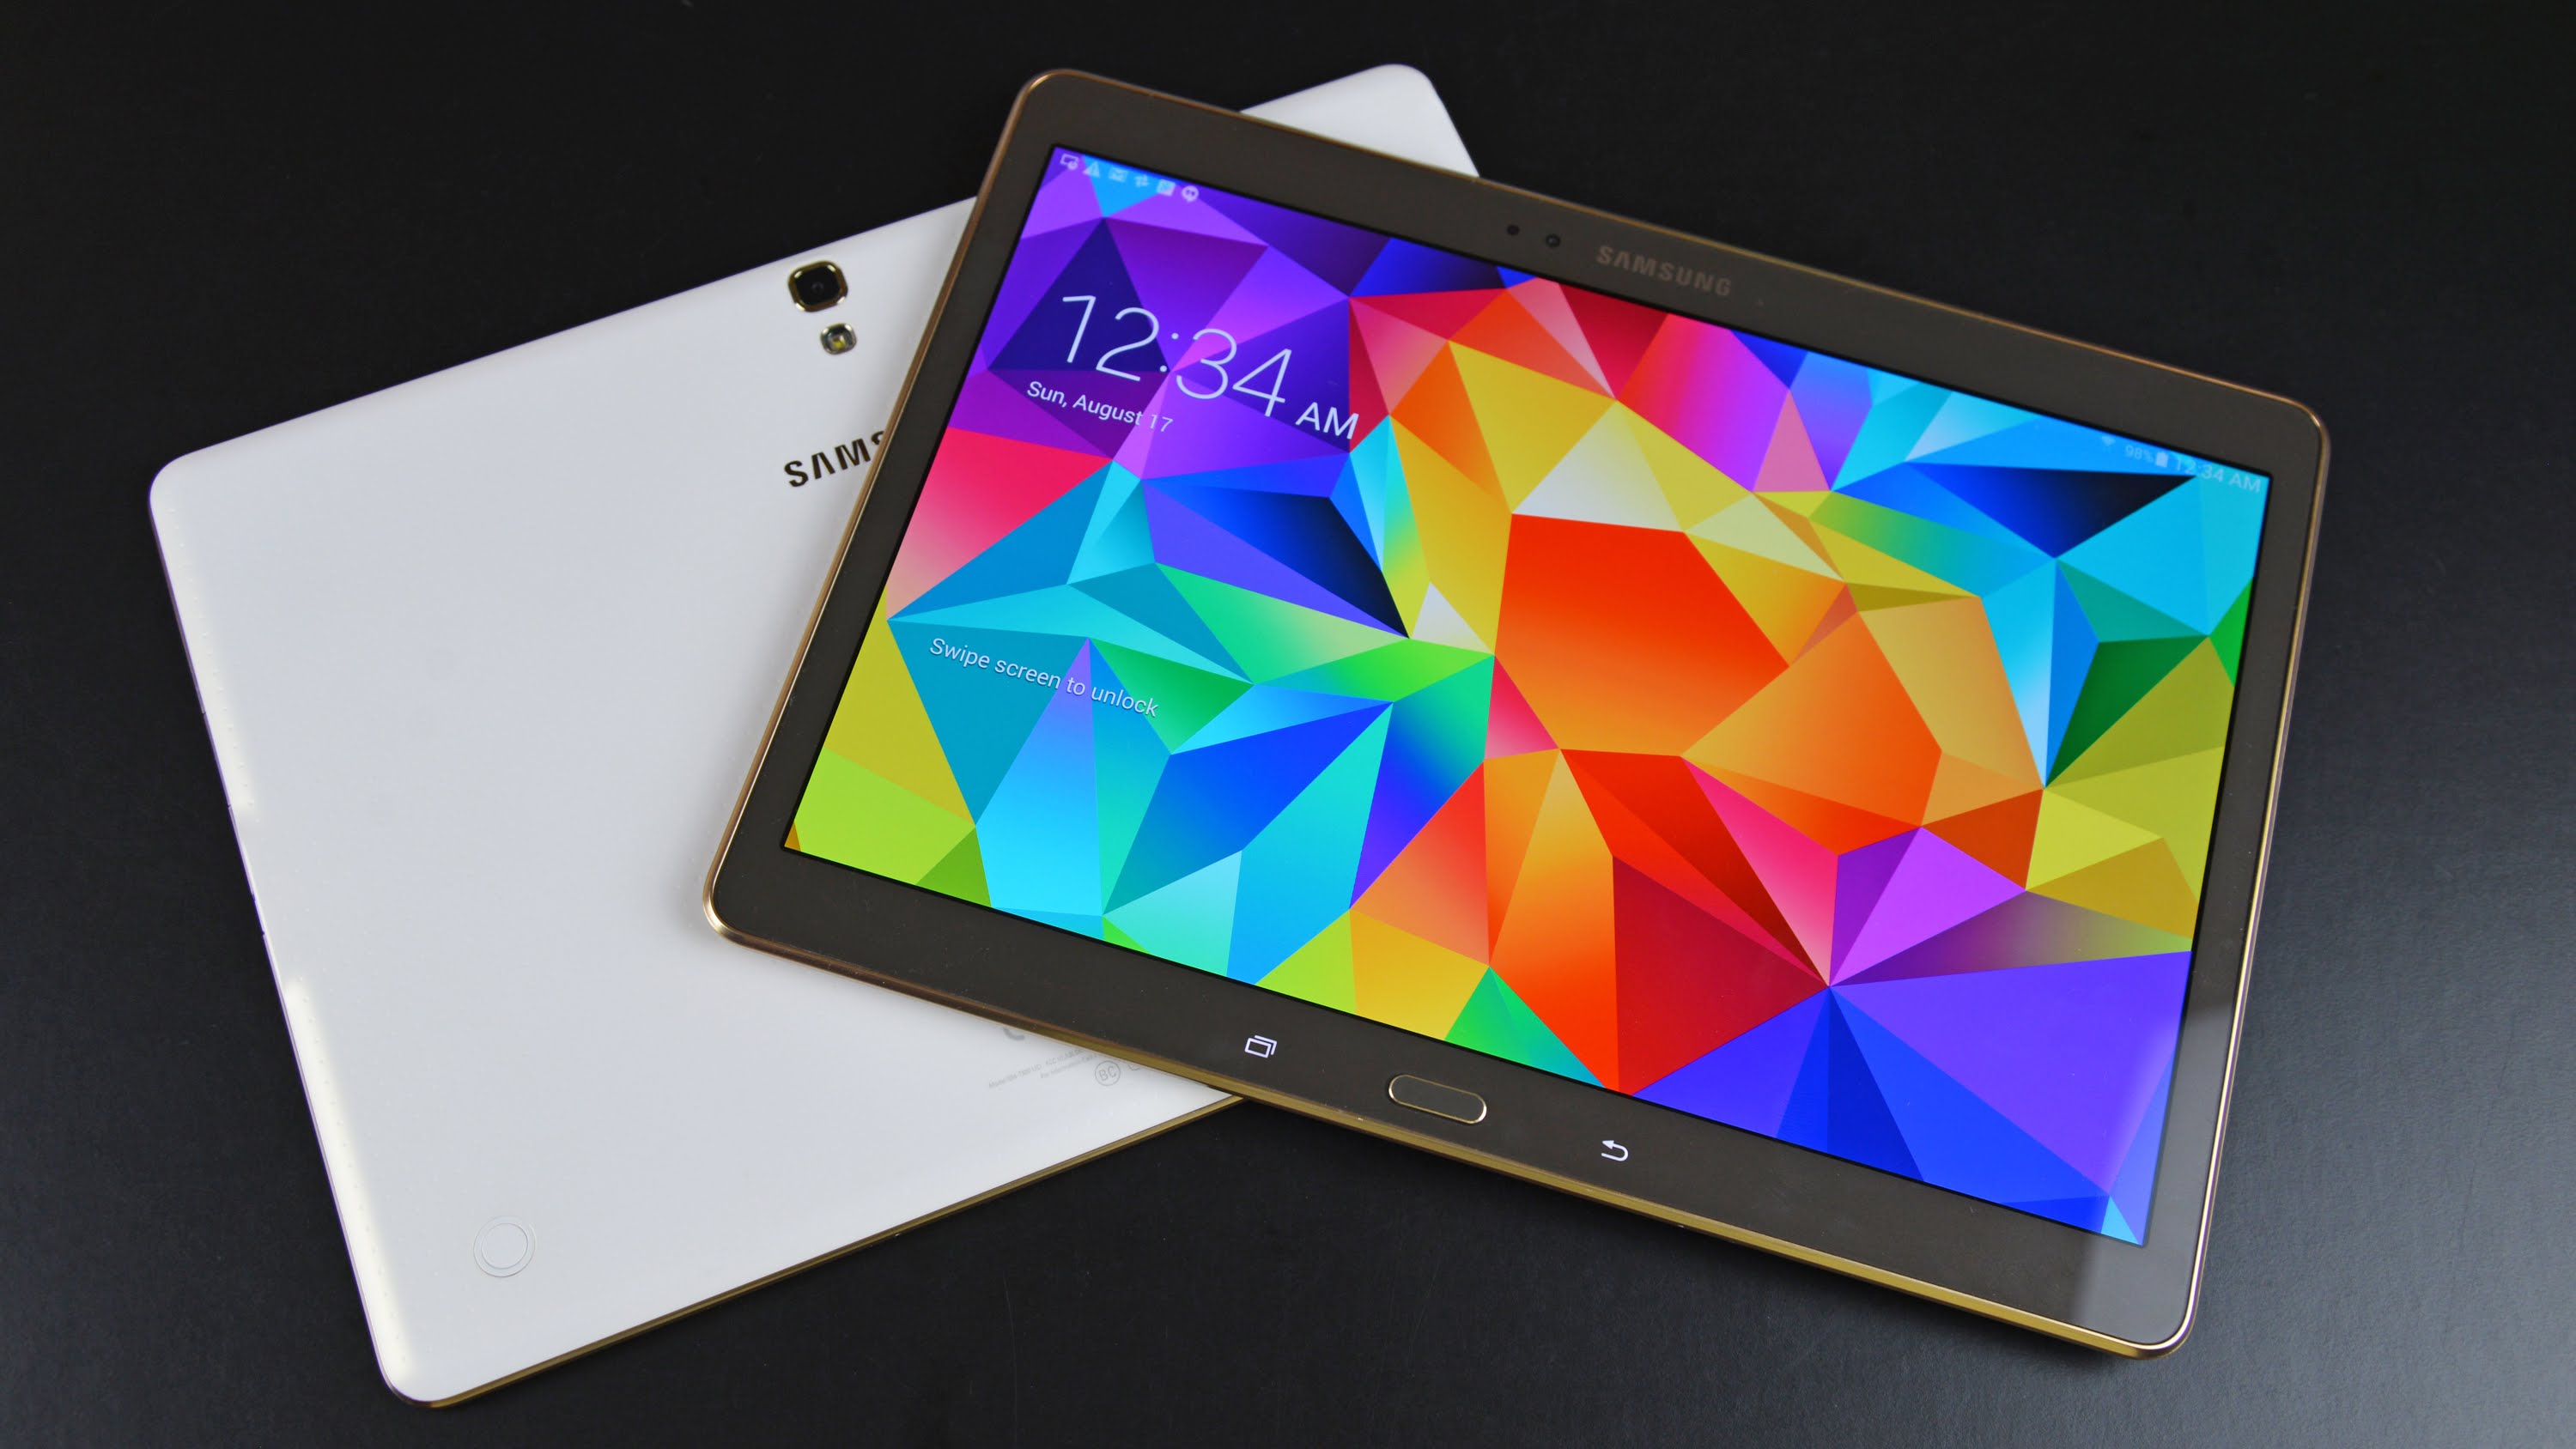 How to install CWM recovery on Samsung Galaxy Tab S 10.5